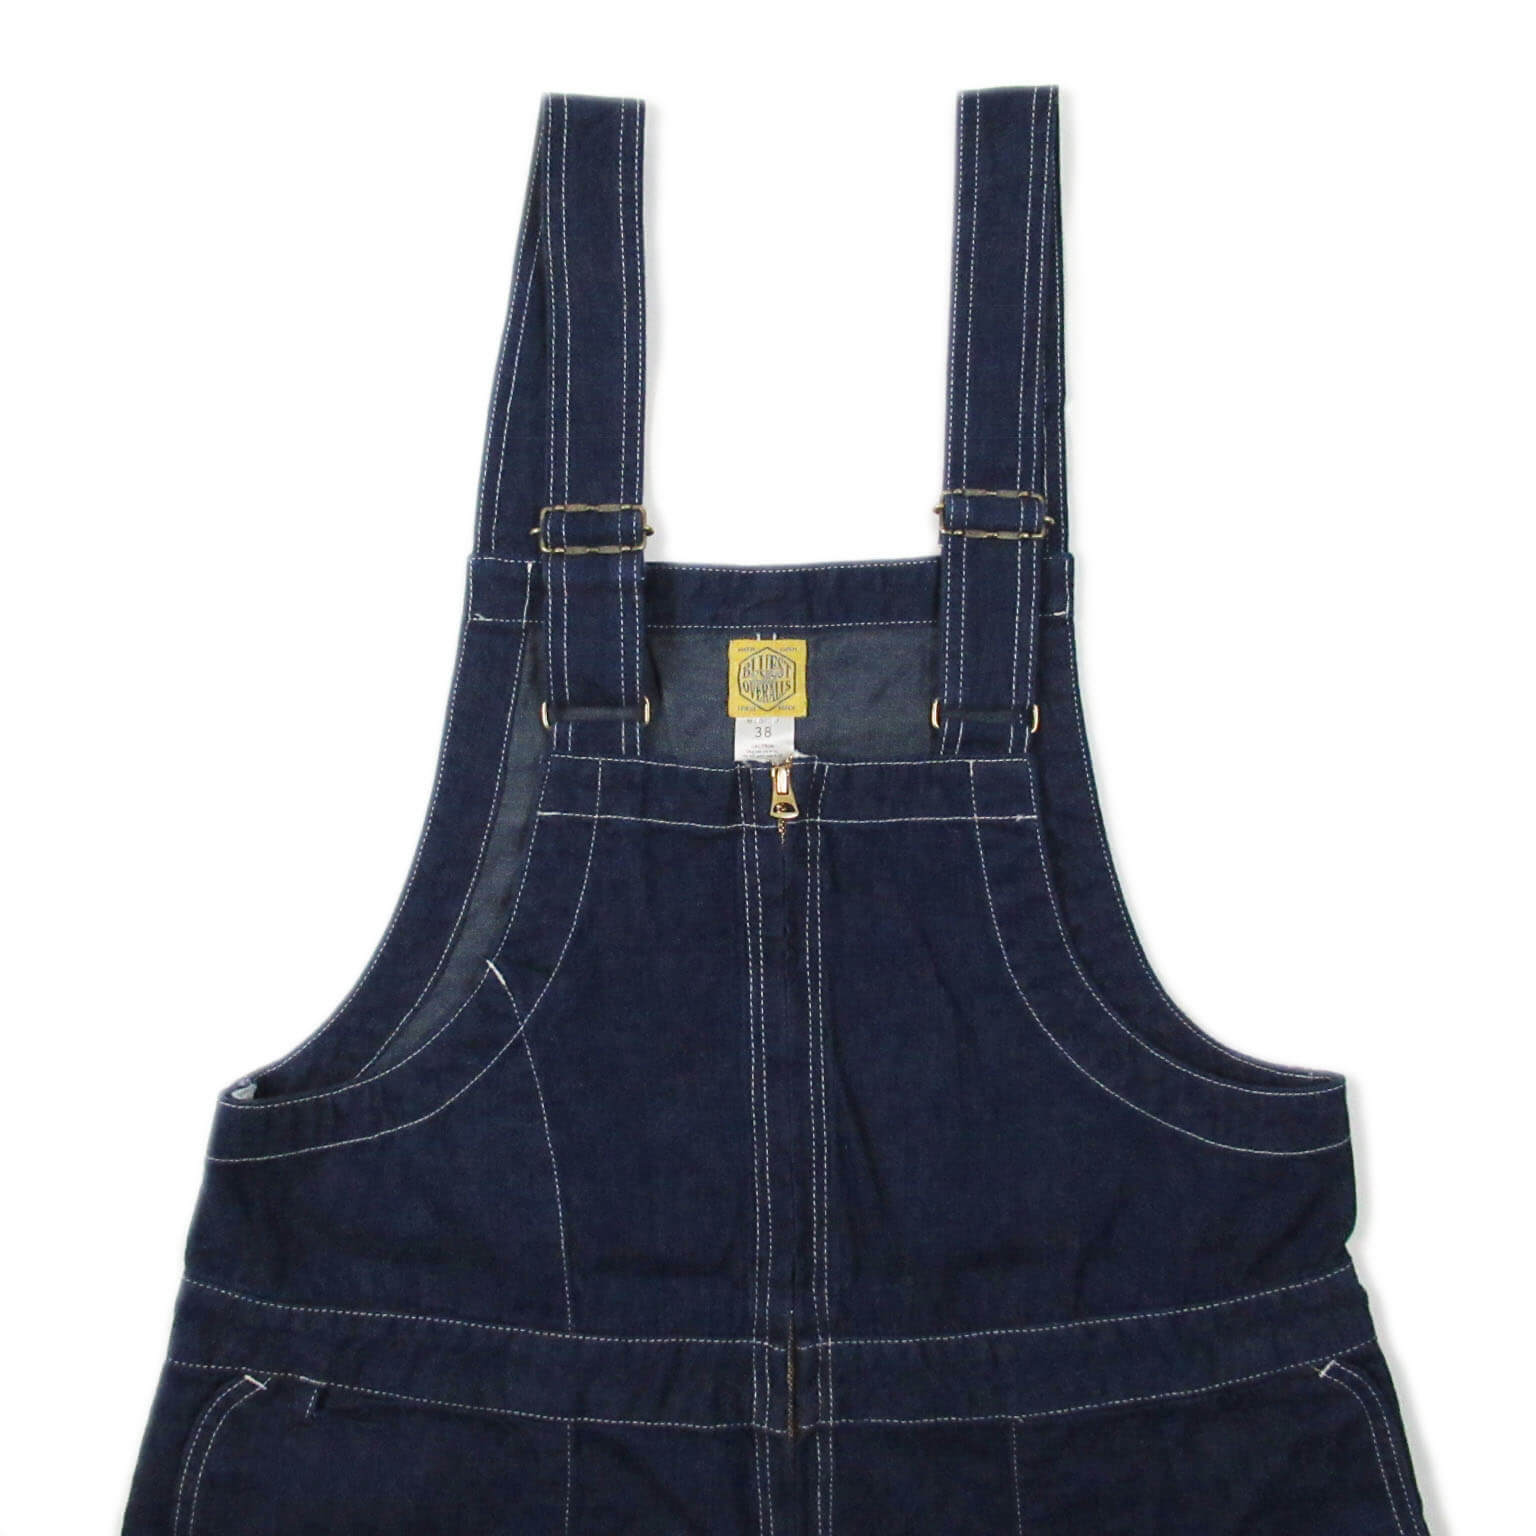 now on sale THE UNION / THE BLUEST OVERALLS “DENIM OVERALL” | ブログ